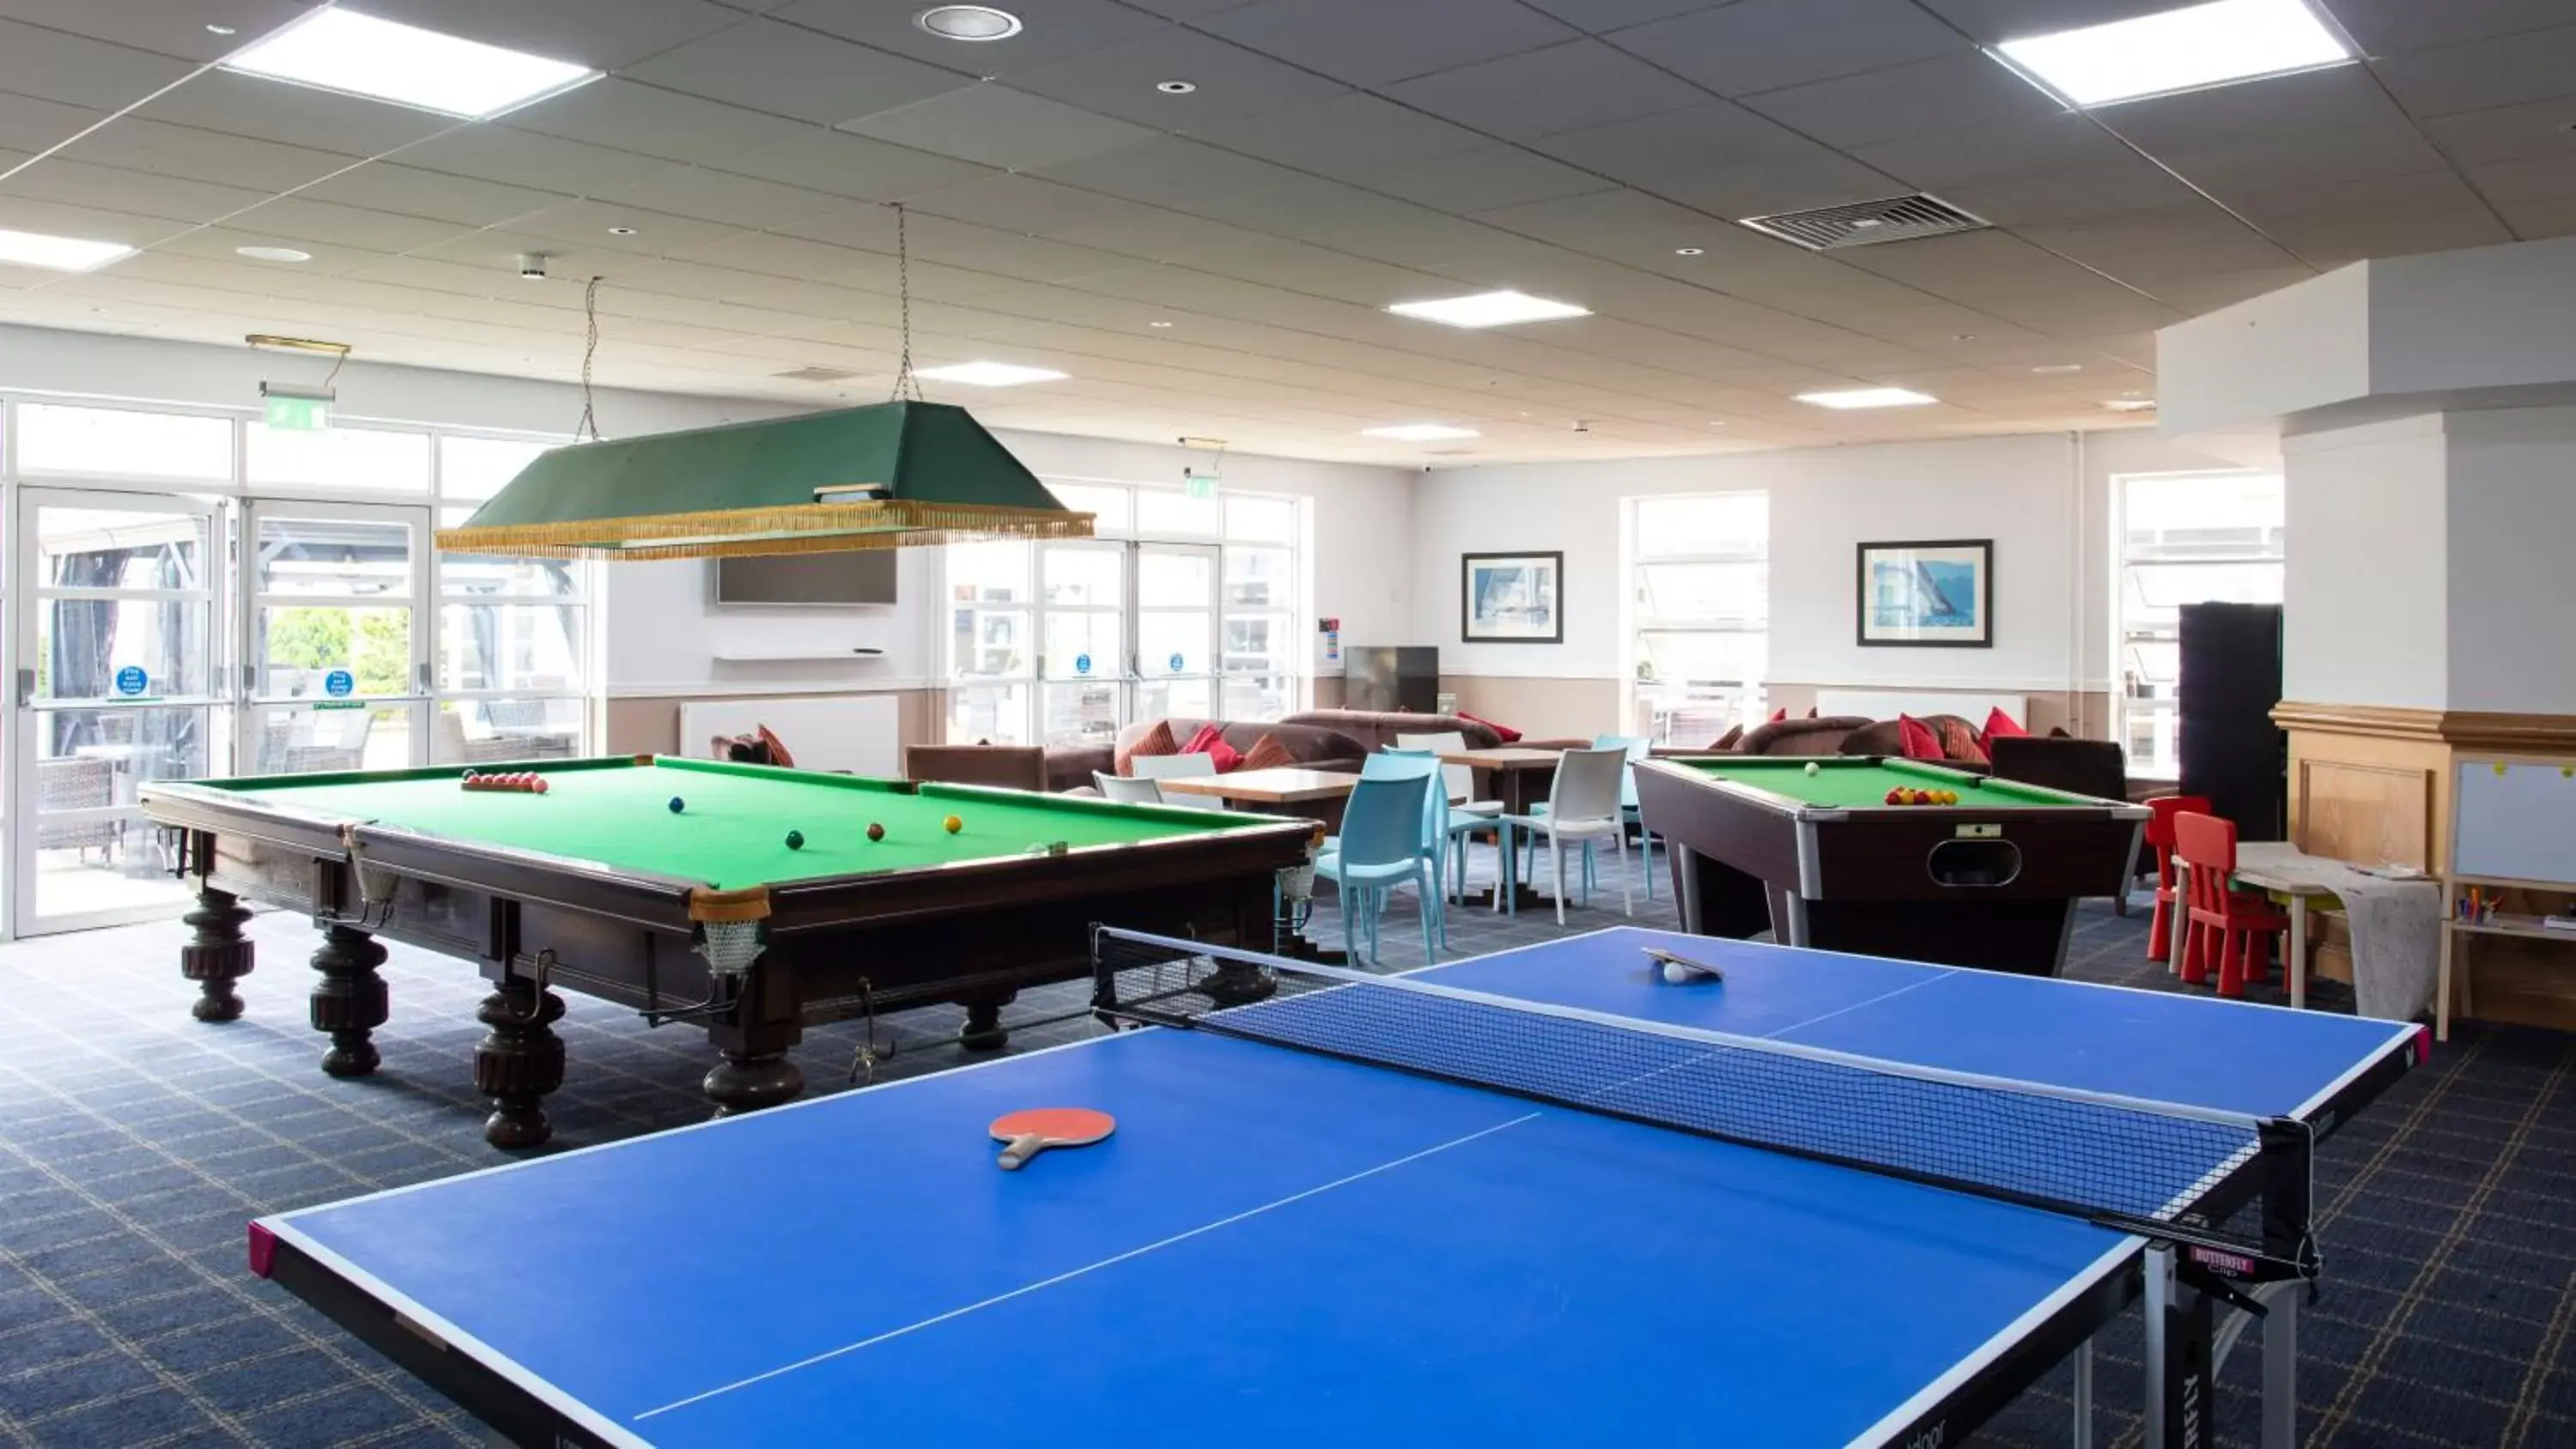 Game Room, Billiards in Eastwood Hall